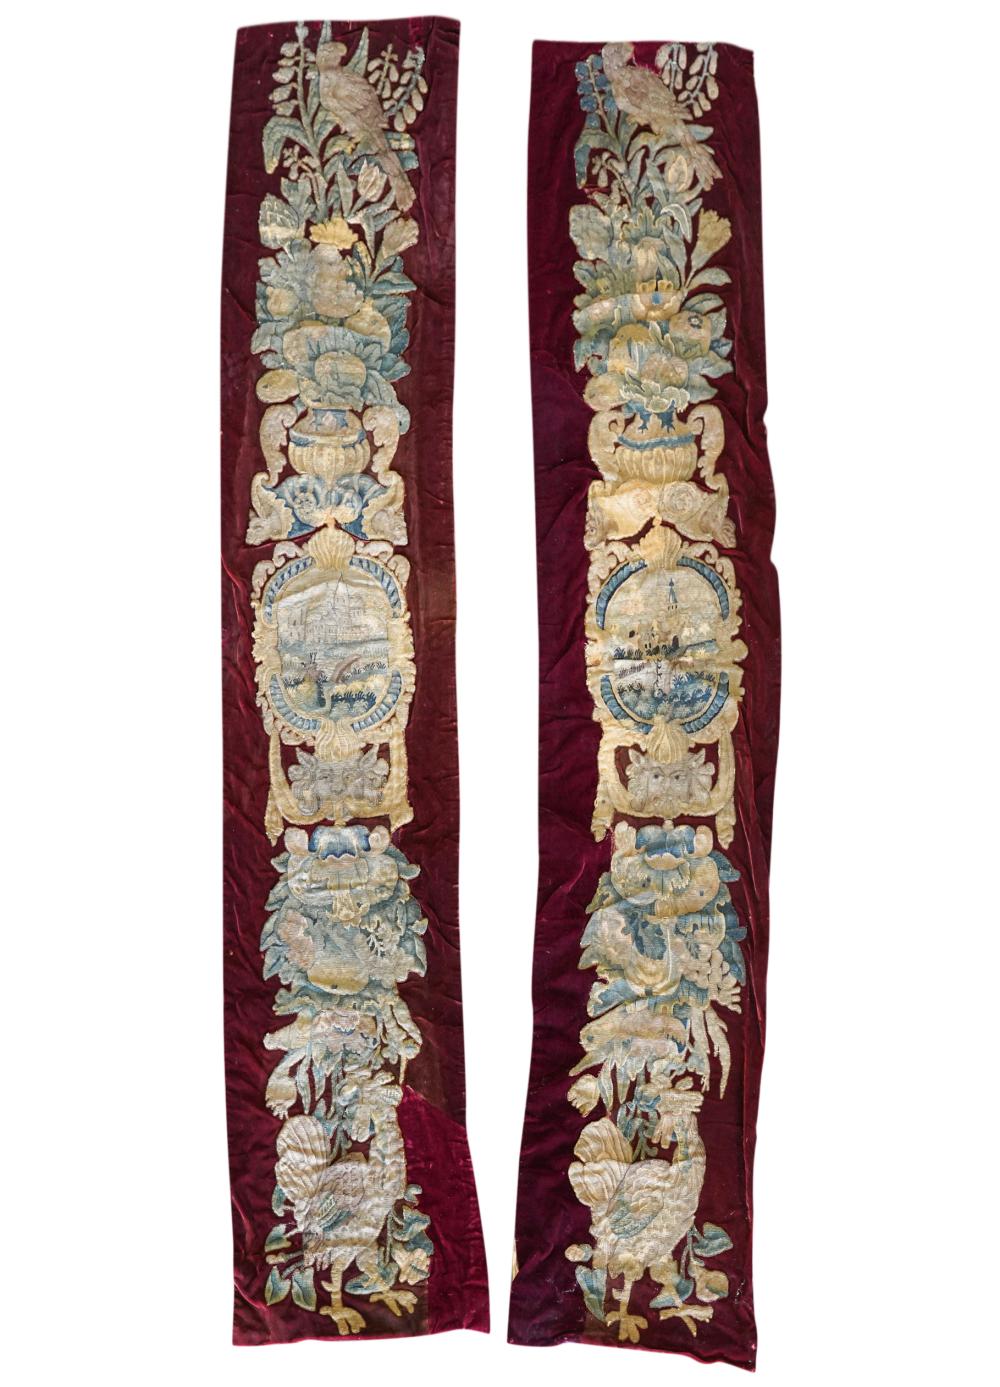 PAIR OF CONTINENTAL TAPESTRY WALLHANGINGSPair